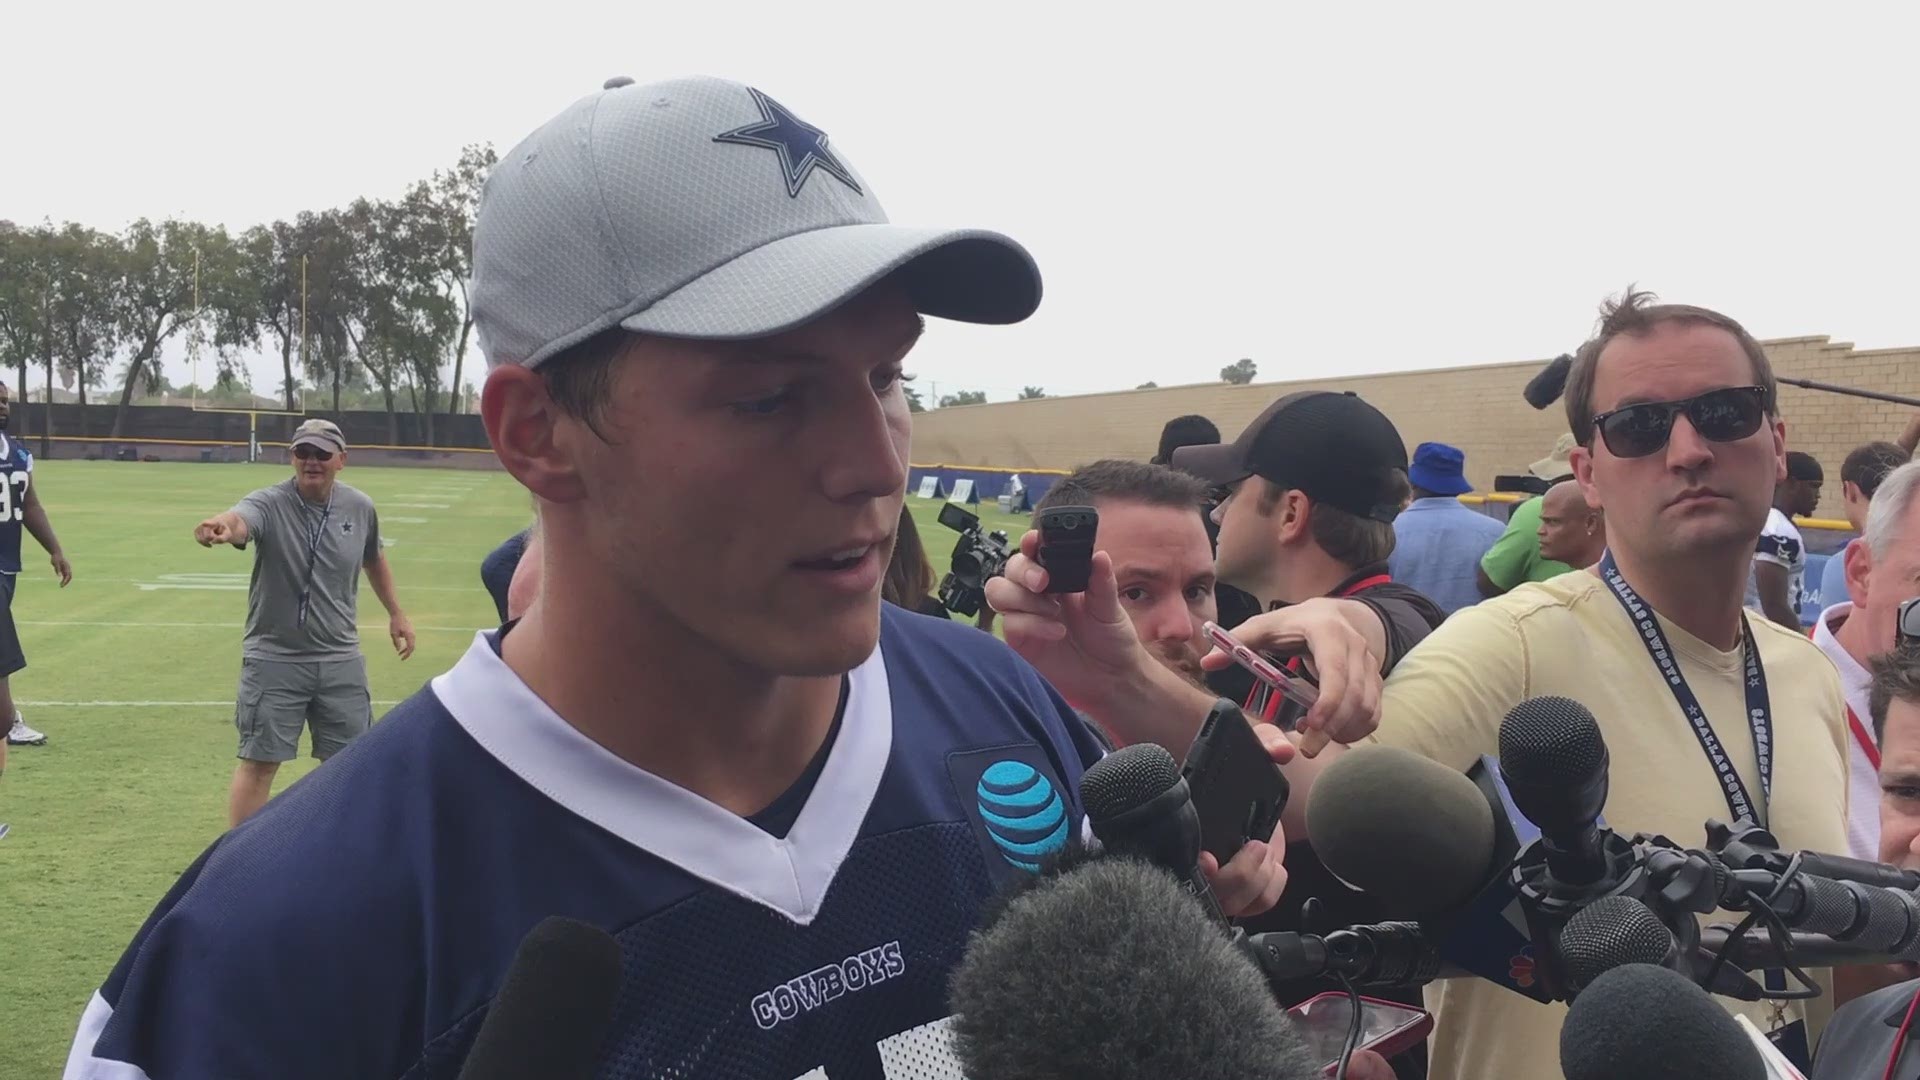 Top draft choice Leighton Vander Esch is excited to officially be in a Cowboys uniform on an NFL practice field at training camp. WFAA.com